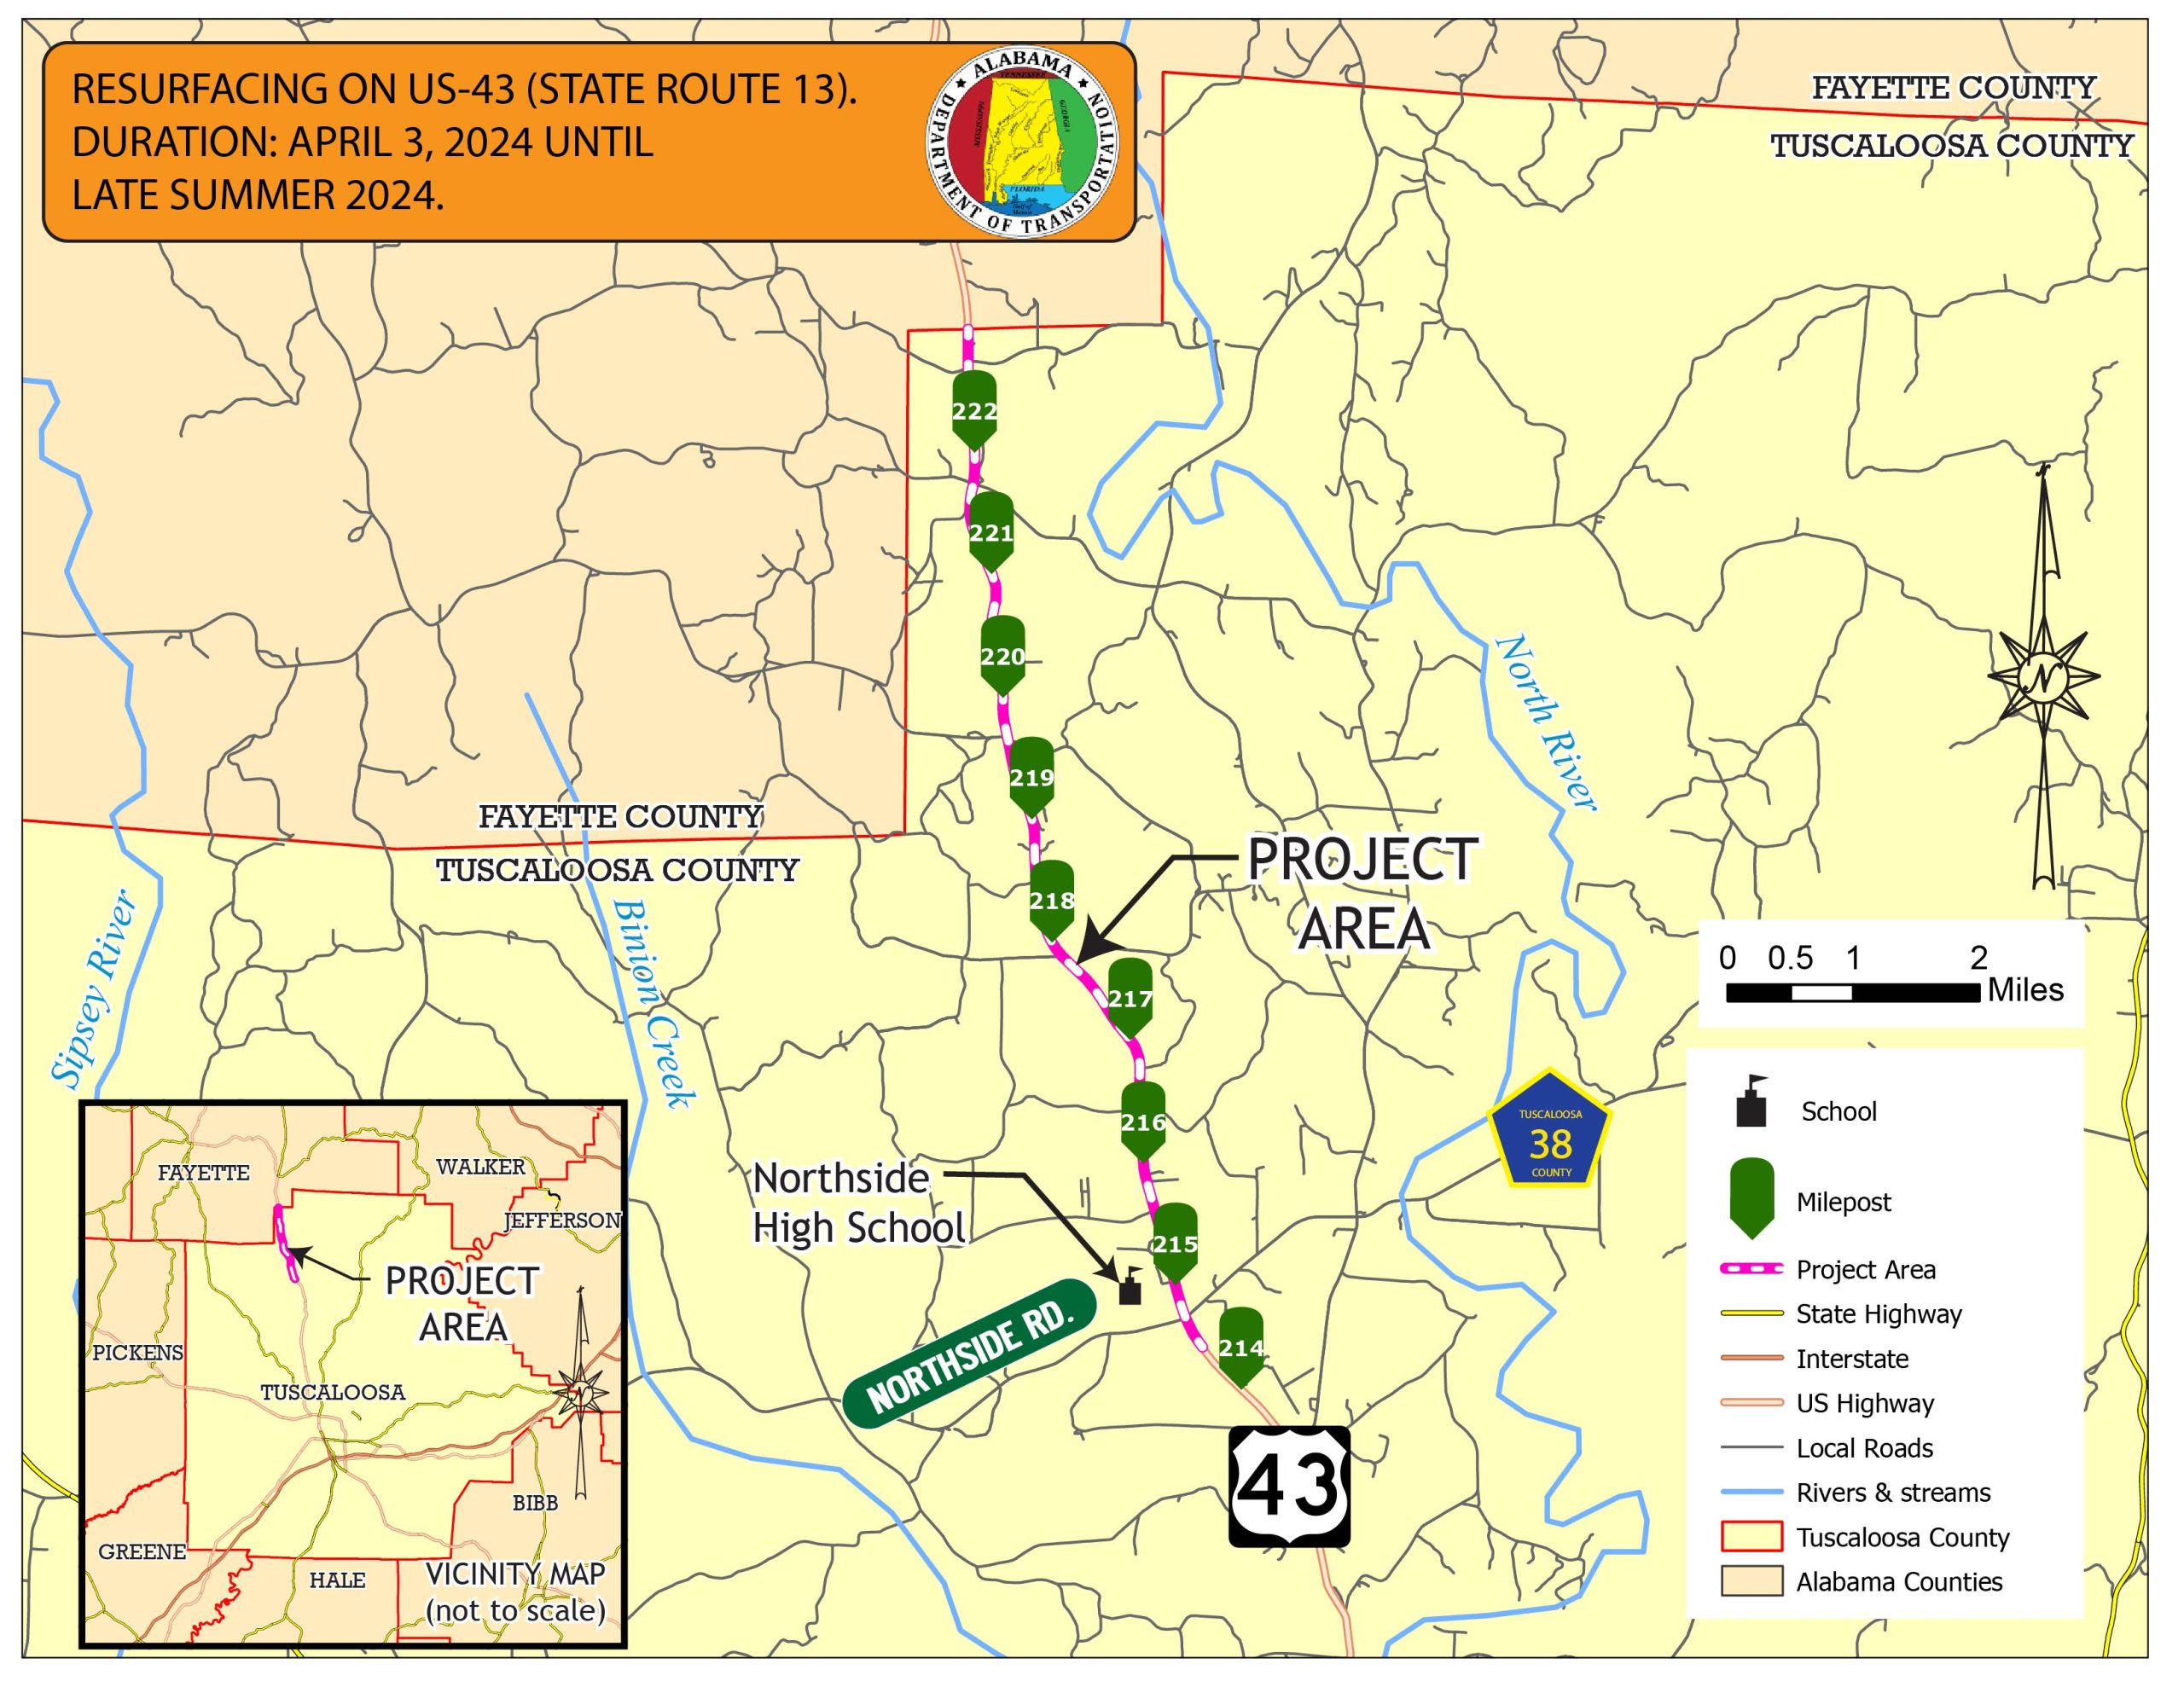 Map of the resurfacing project being done on US-43 in Tuscaloosa County